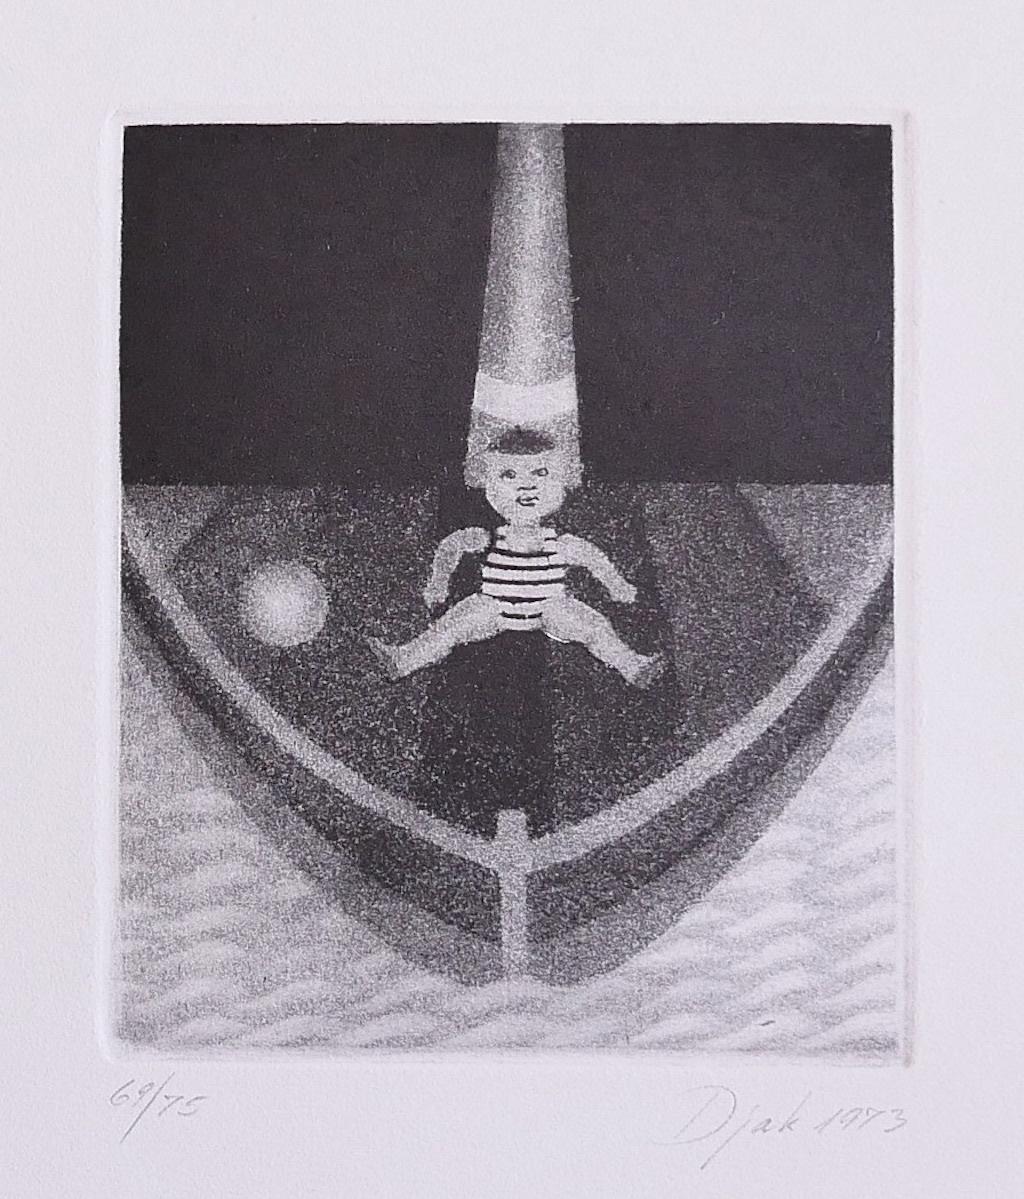 Dreamy is an original modern artwork realized by Zivko Djak in 1973.

Original etching on paper.

Hand-signed on the lower right.

Numbered. Edition, 69/75.

Good Conditions.

This artwork depicted by mastery, applying contrast by lines through